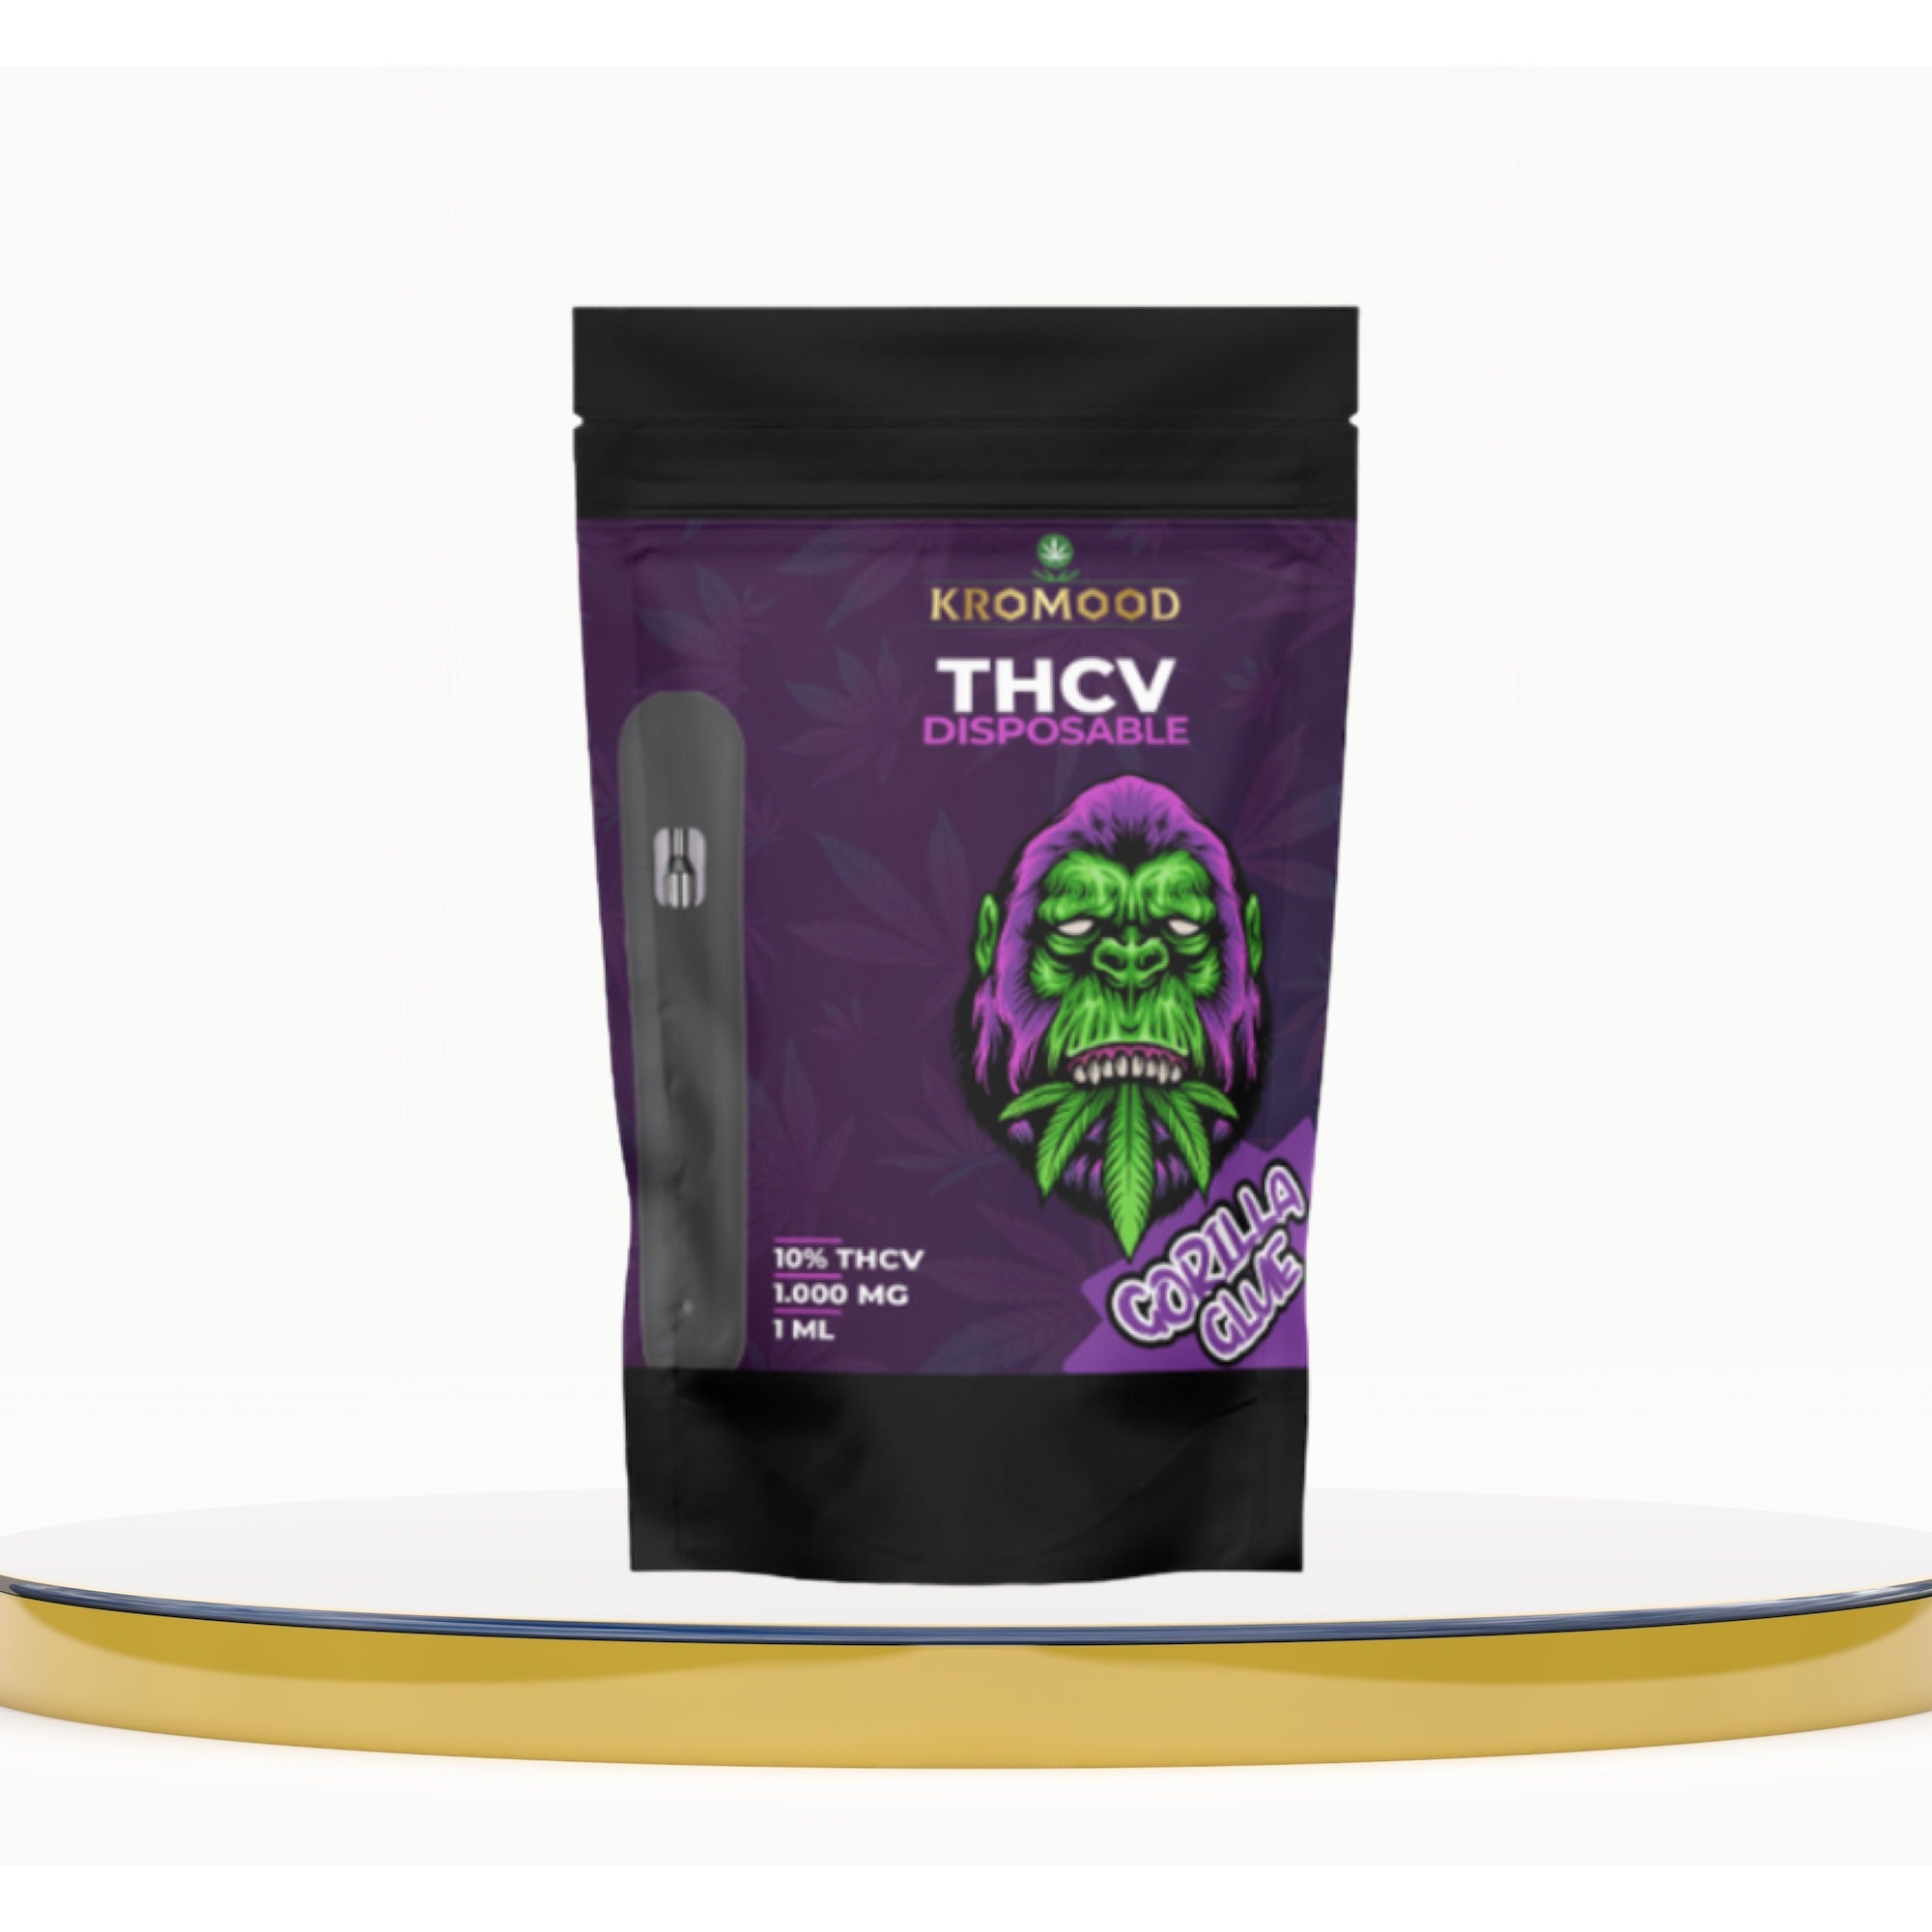 KroMood THCV Disposable Puff - Gorilla Glue: The Art of Sublimated Vaping, 10% THCV/1ML, 600 Puffs, CCELL Puff Technology 